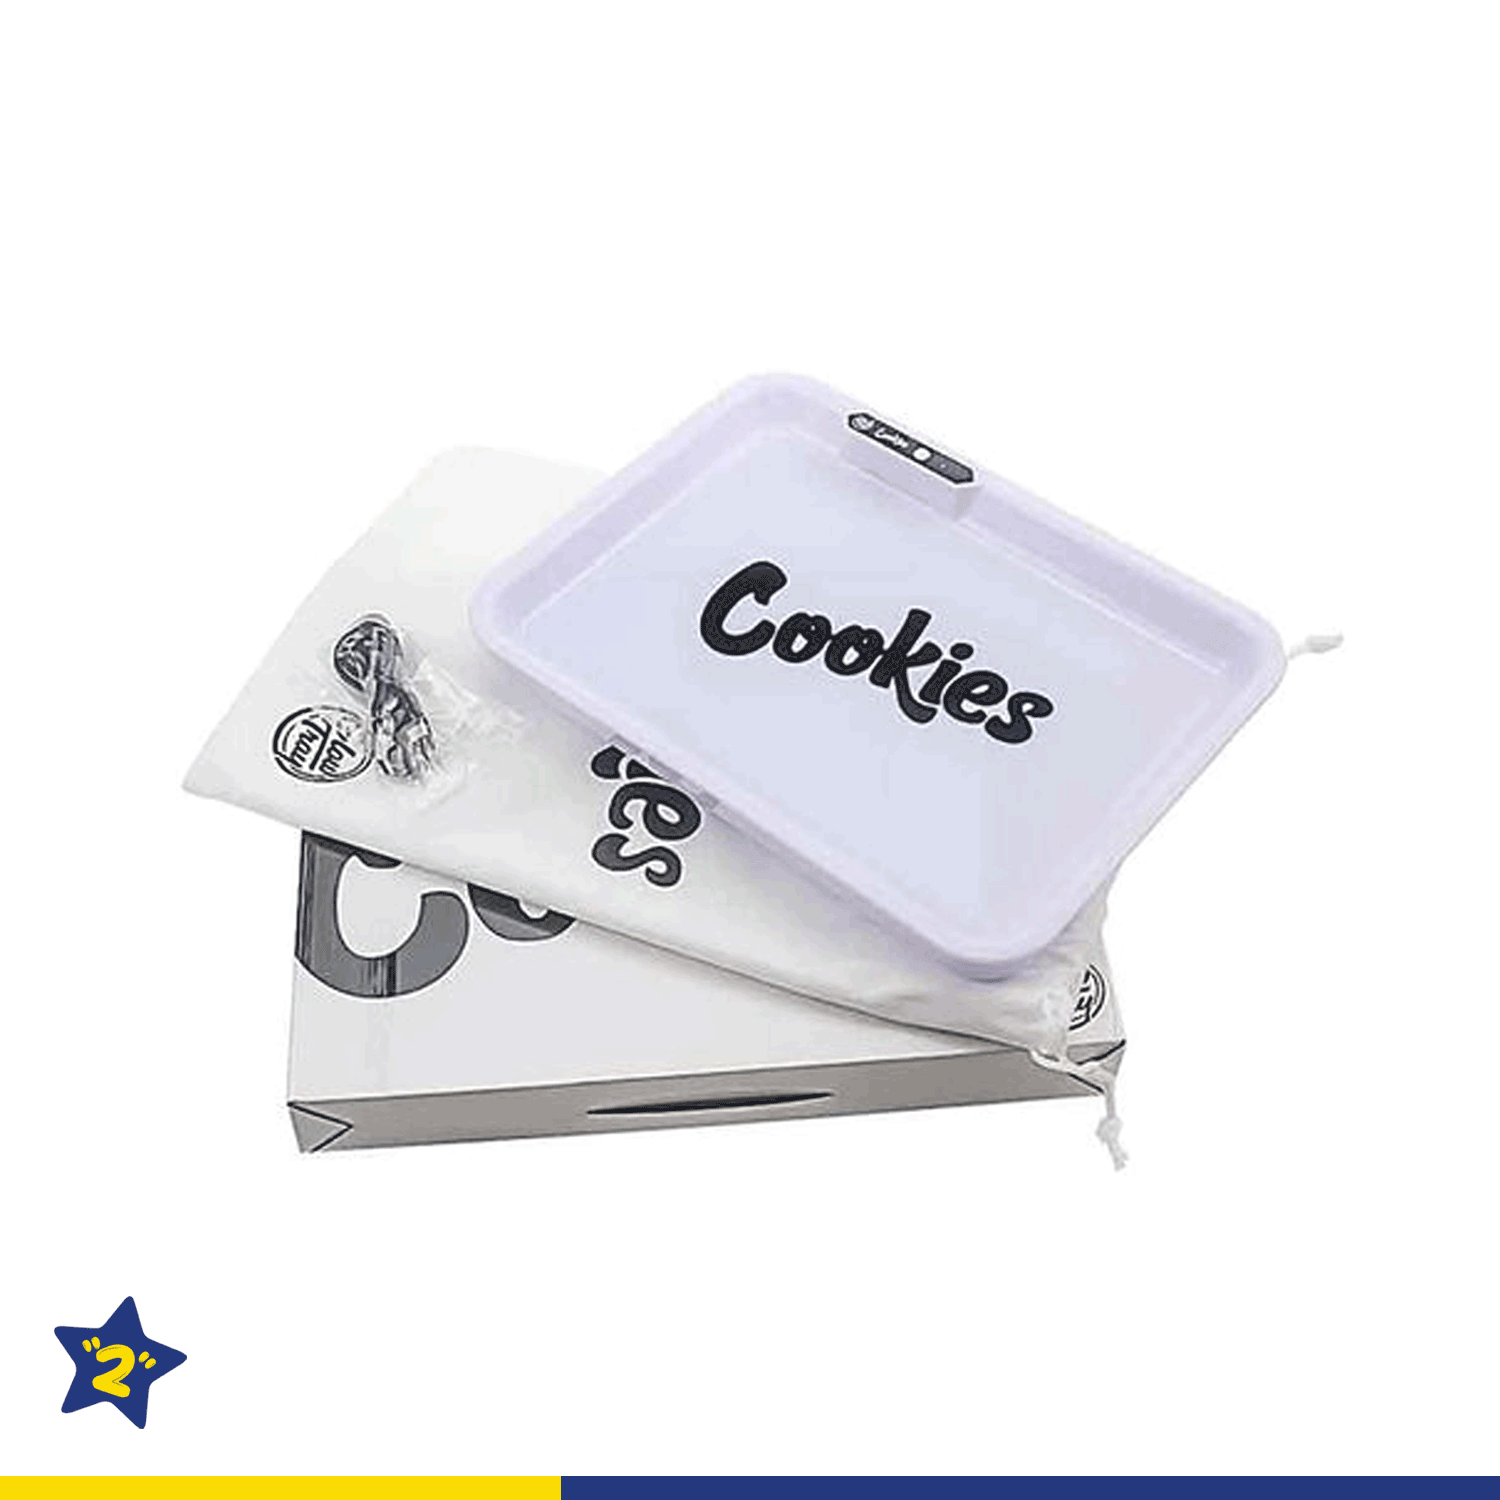 Cookies LED Glow Rolling Tray White 